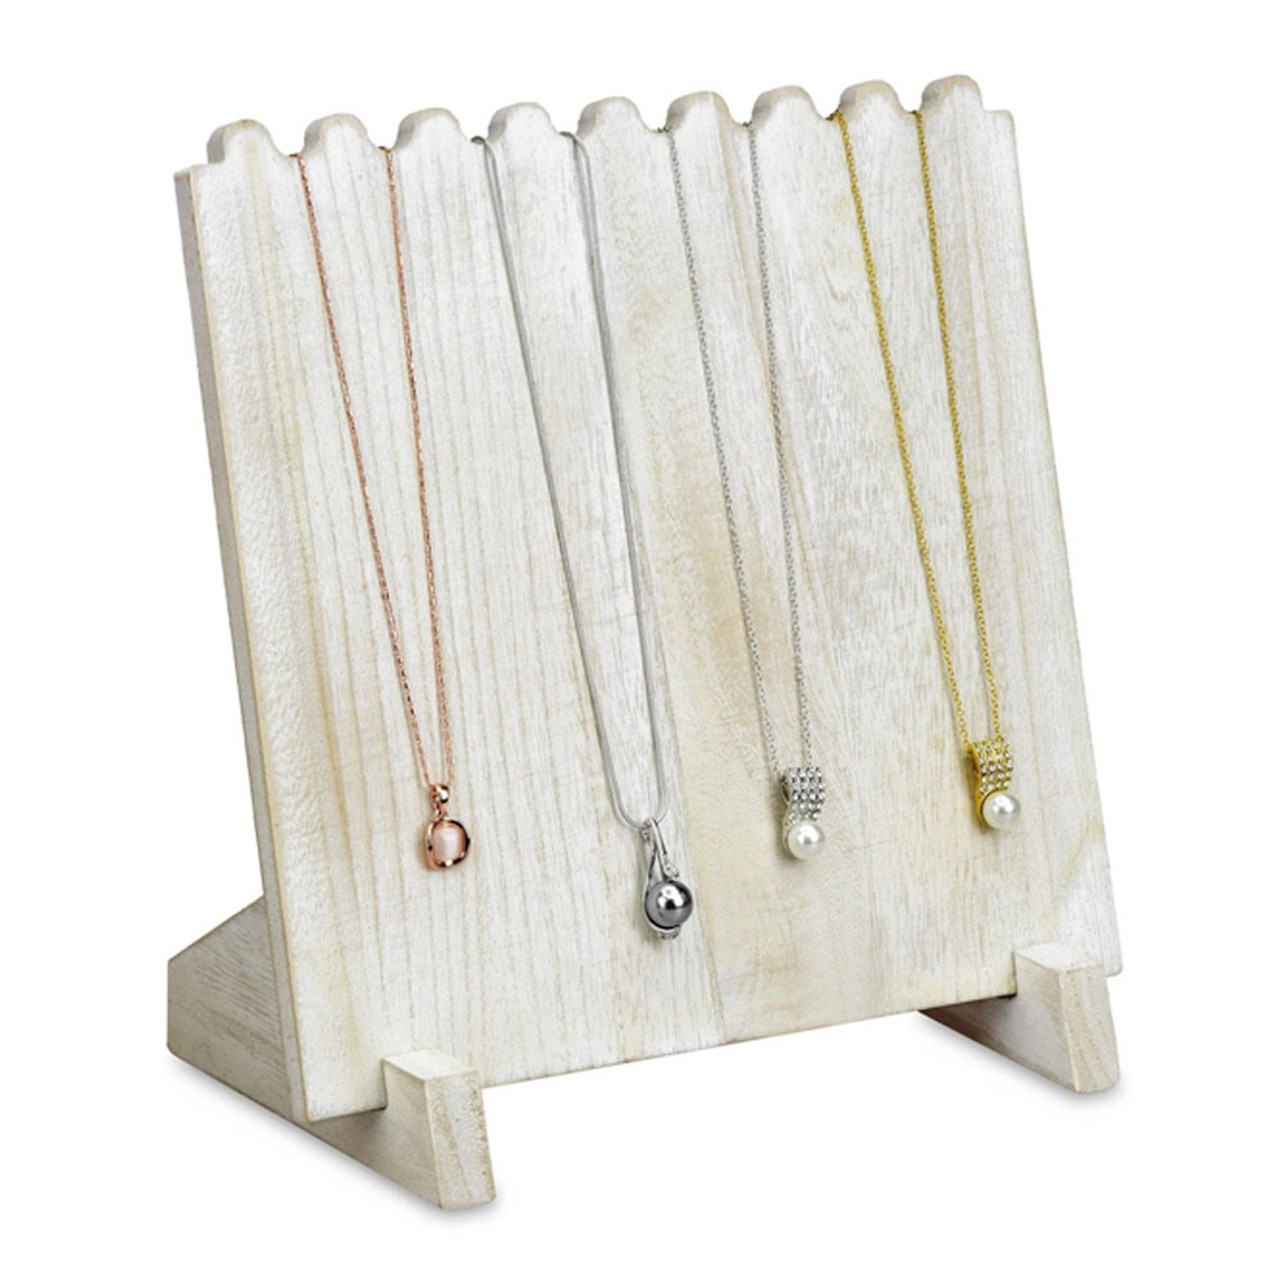 White Wash Wooden Plank Necklace Display 9-3/8"w x 5-1/2"d x 10-1/4"h